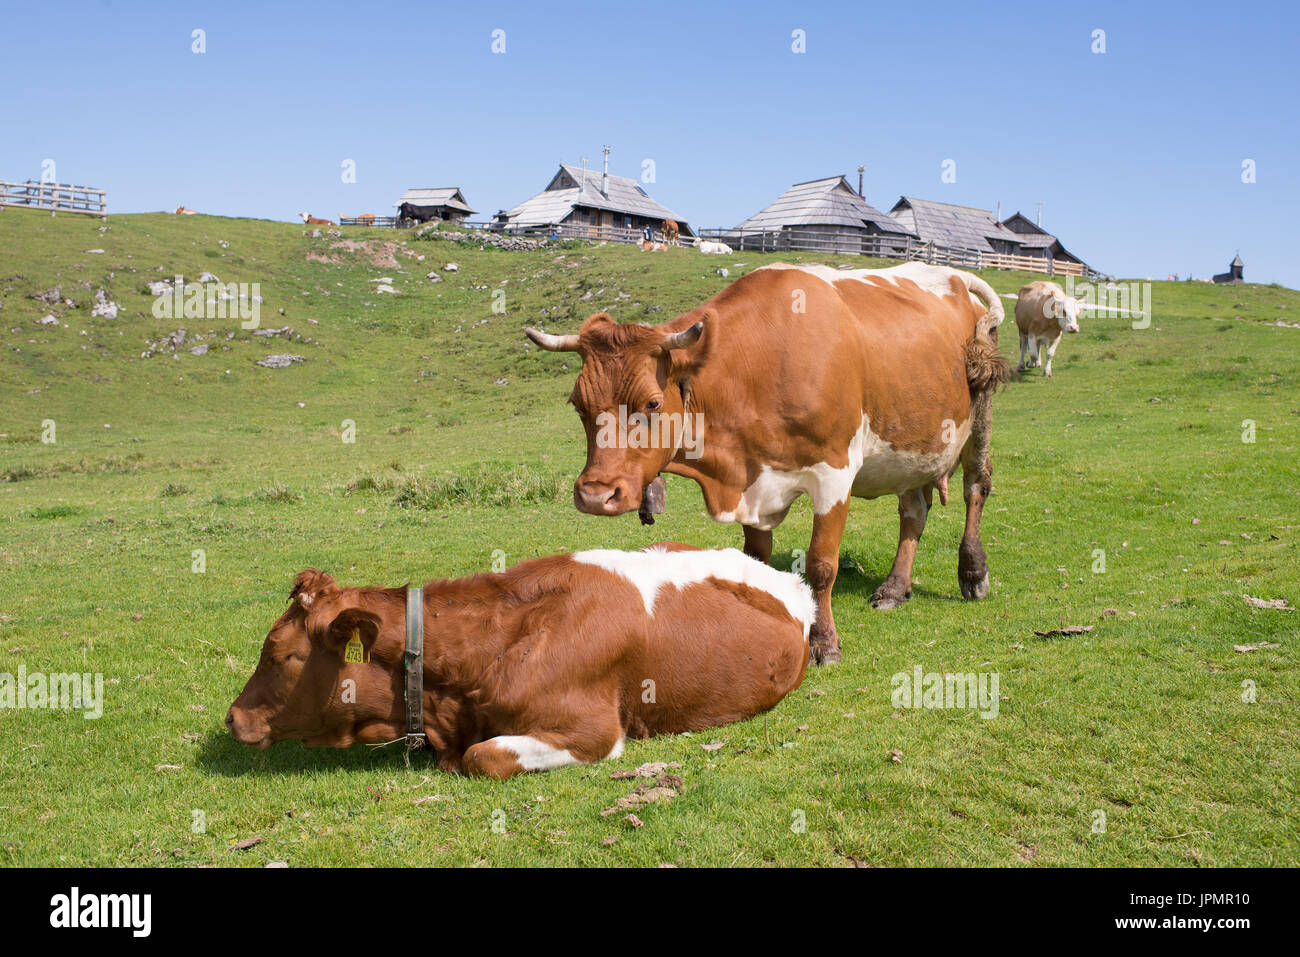 Velika planina plateau, Slovenia, Mountain village in Alps, wooden houses in traditional style, popular hiking destination, cattle / cows grasing Stock Photo